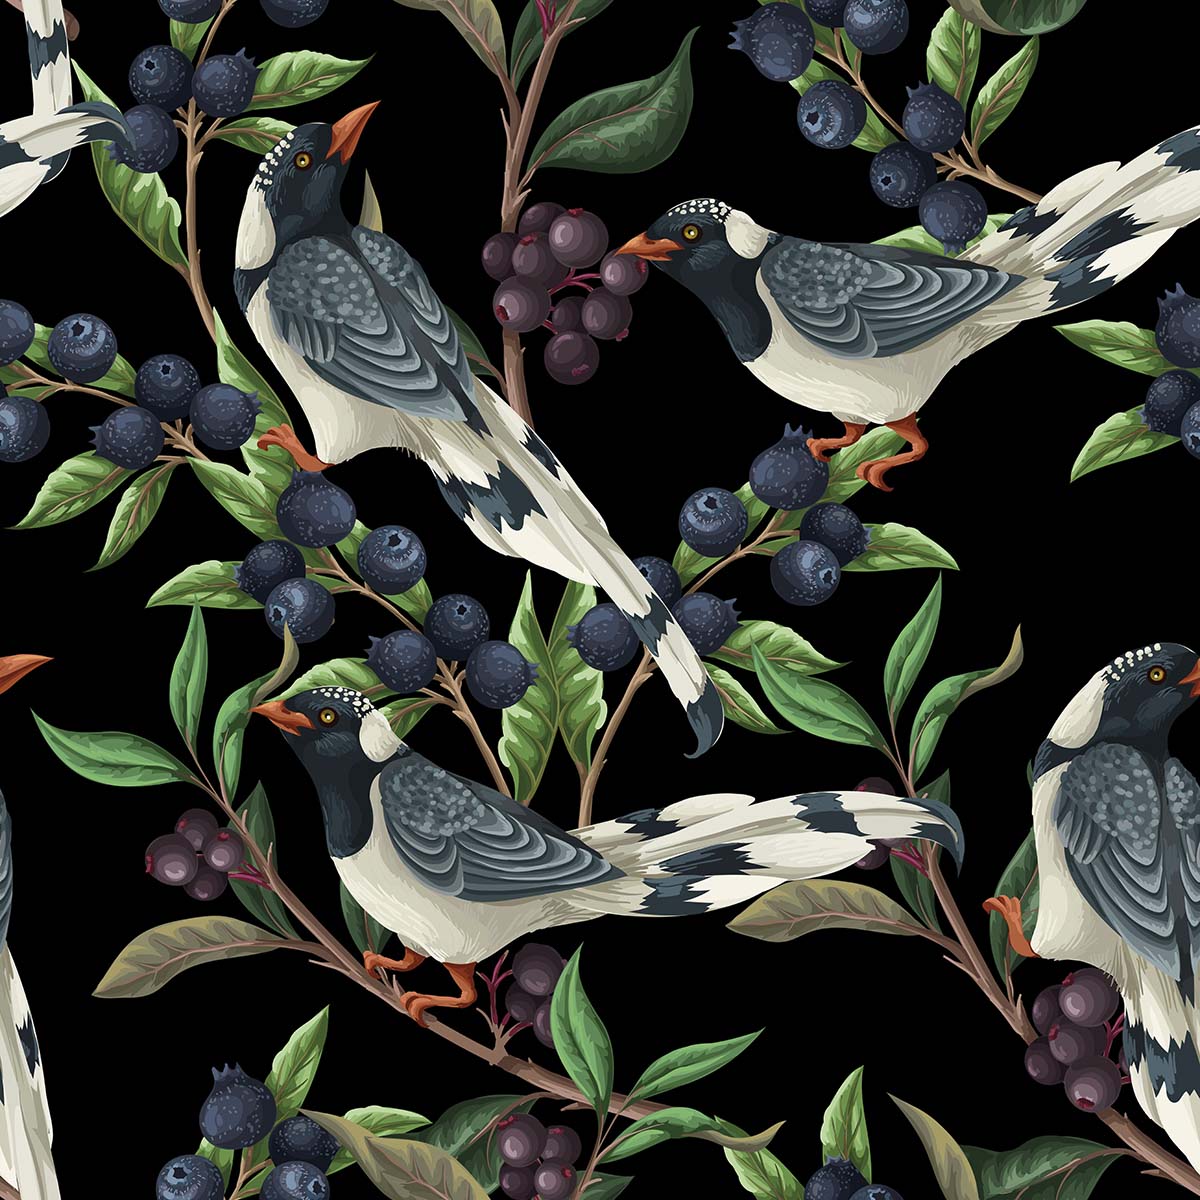 A pattern of birds and berries